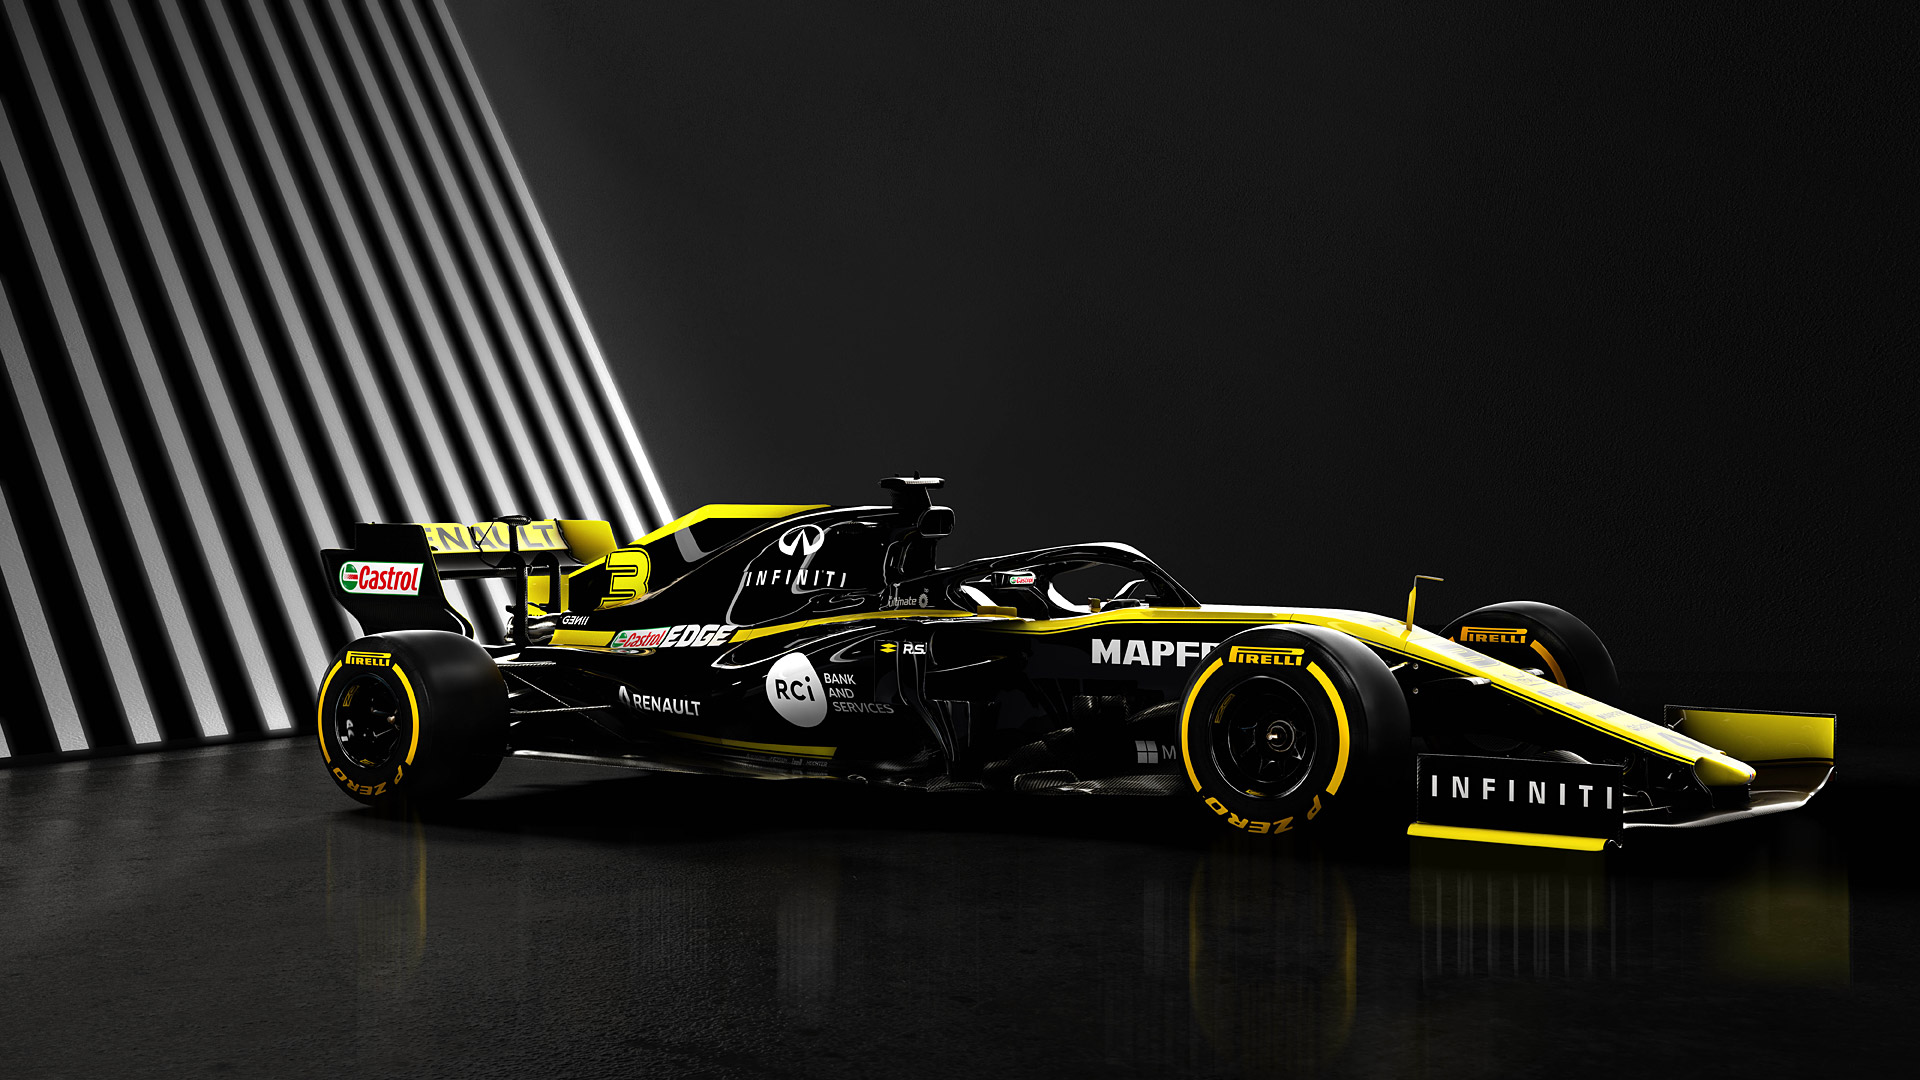 2019 Renault Rs19 Picture - Renault Rs 19 , HD Wallpaper & Backgrounds